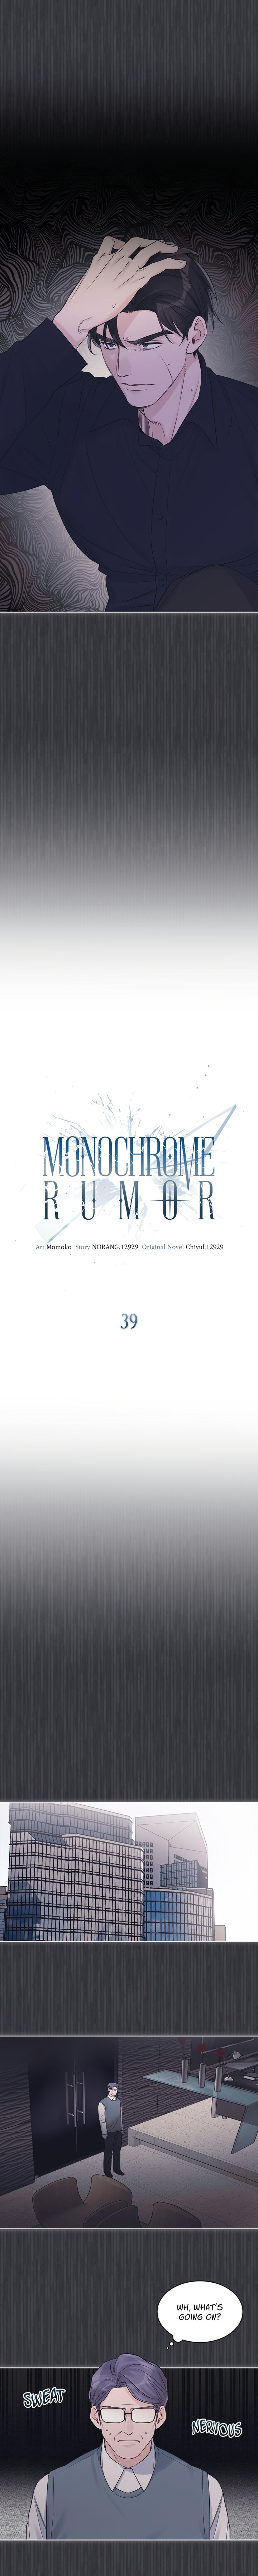 Monochrome Rumor chapter 39 - page 4